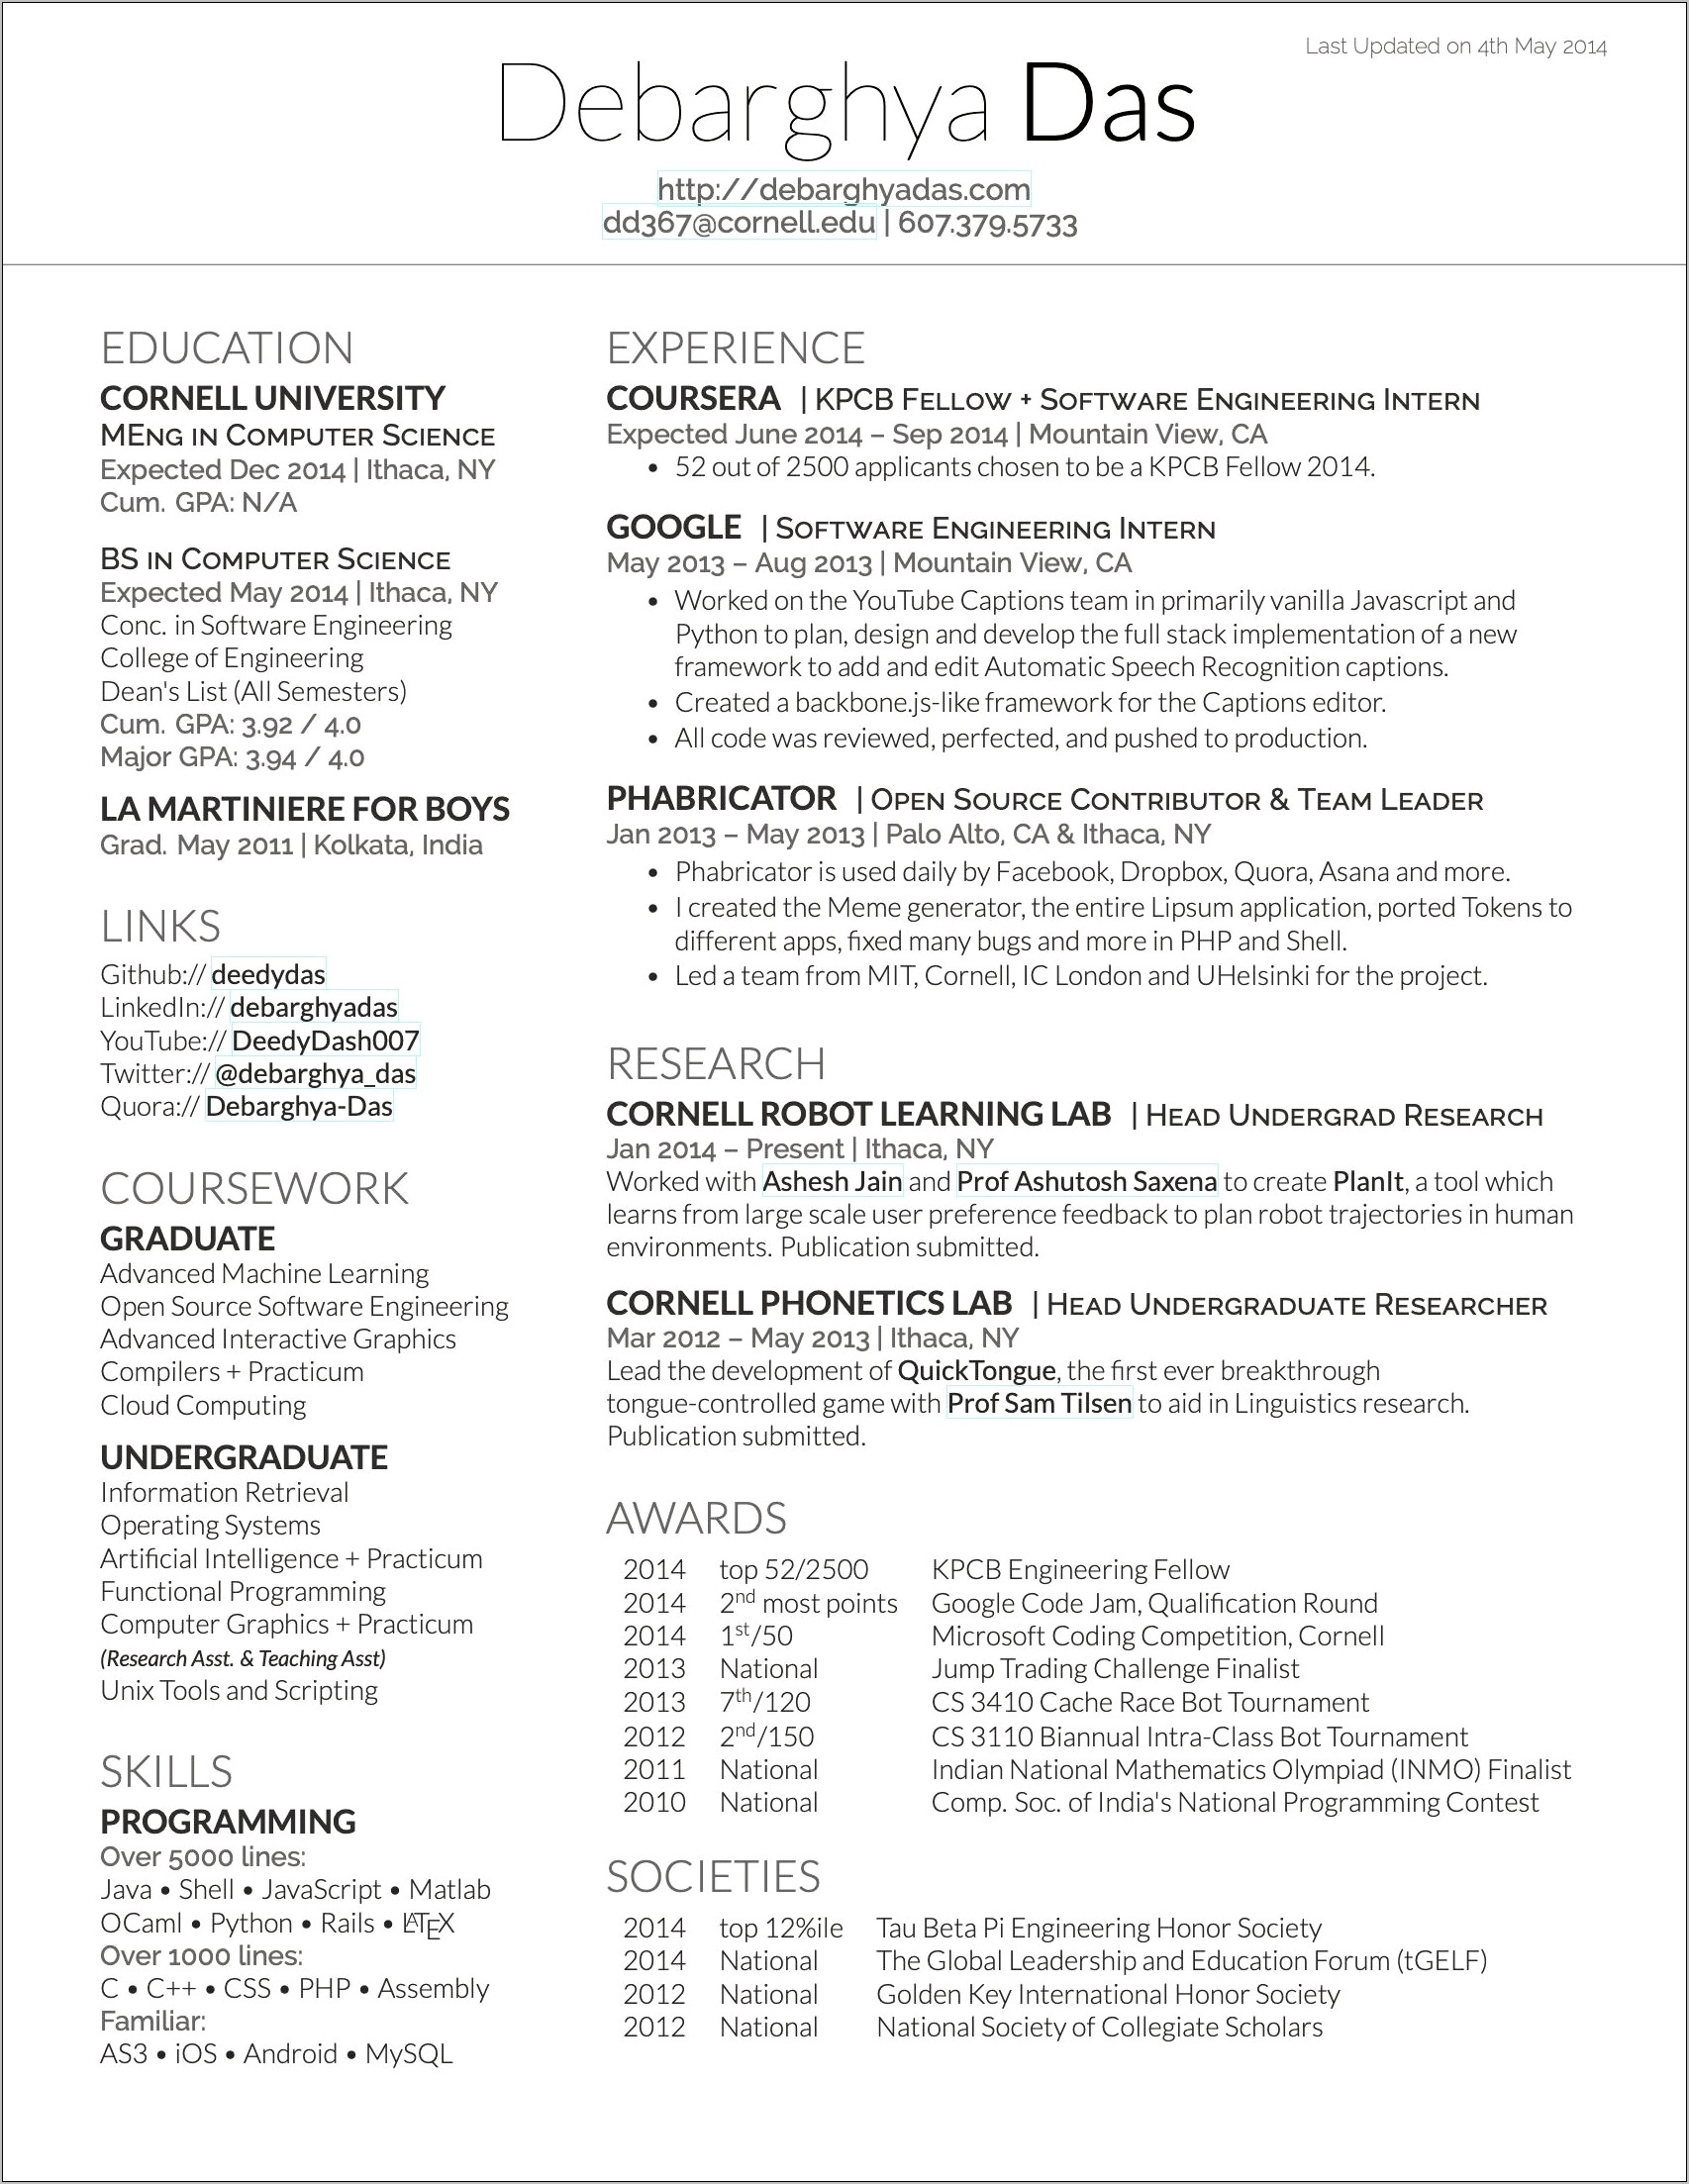 Resume Profile Samples For Researchers